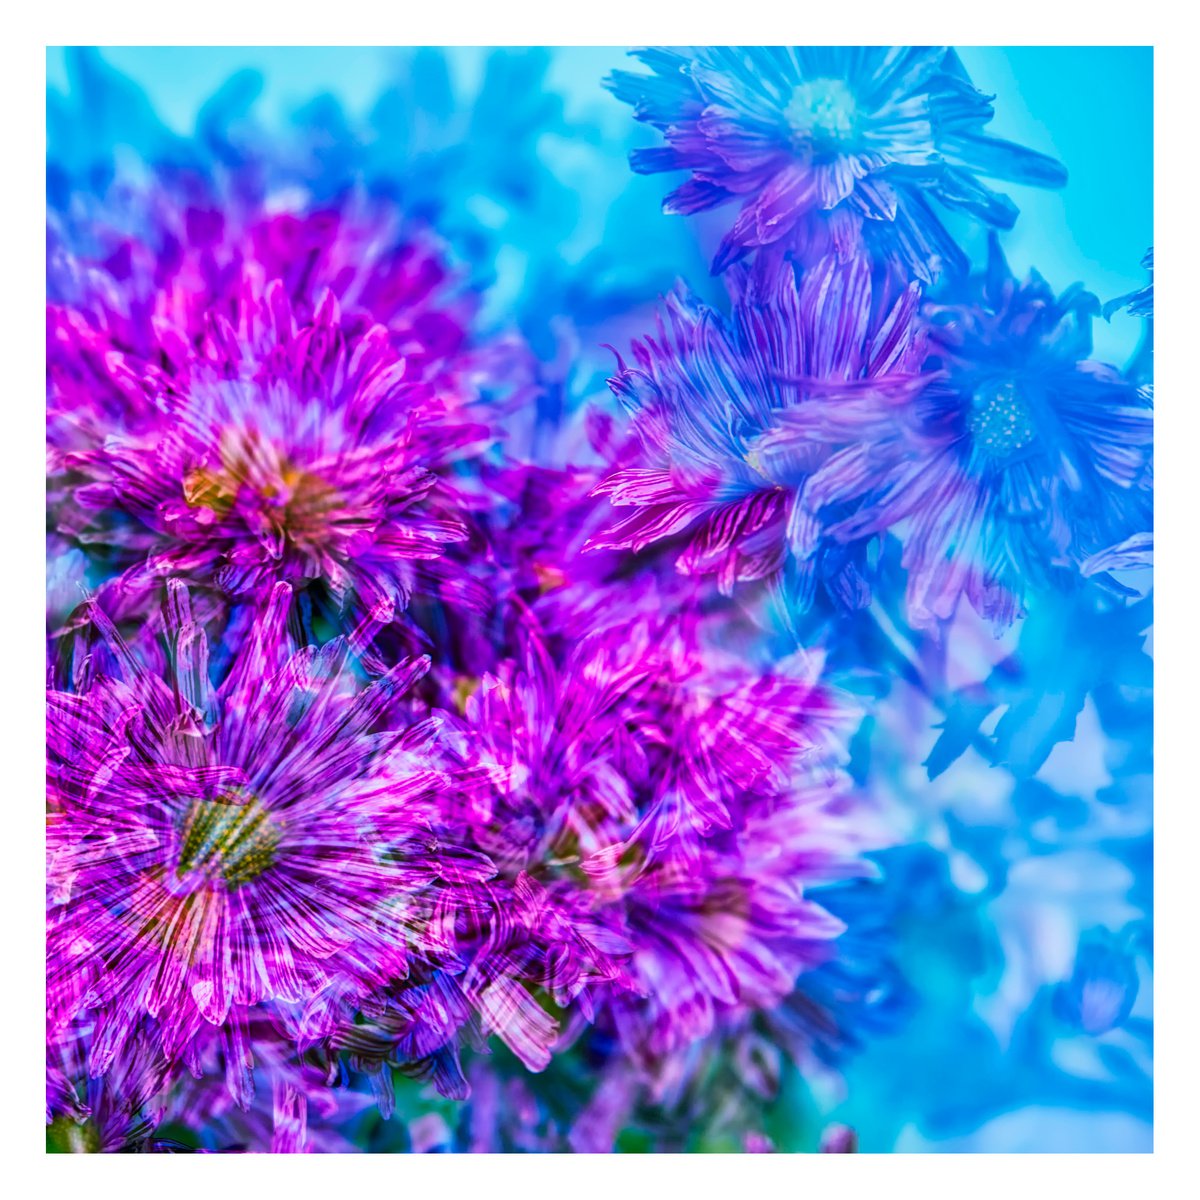 Abstract Flowers #4. Limited Edition 1/25 12x12 inch Photographic Print. by Graham Briggs